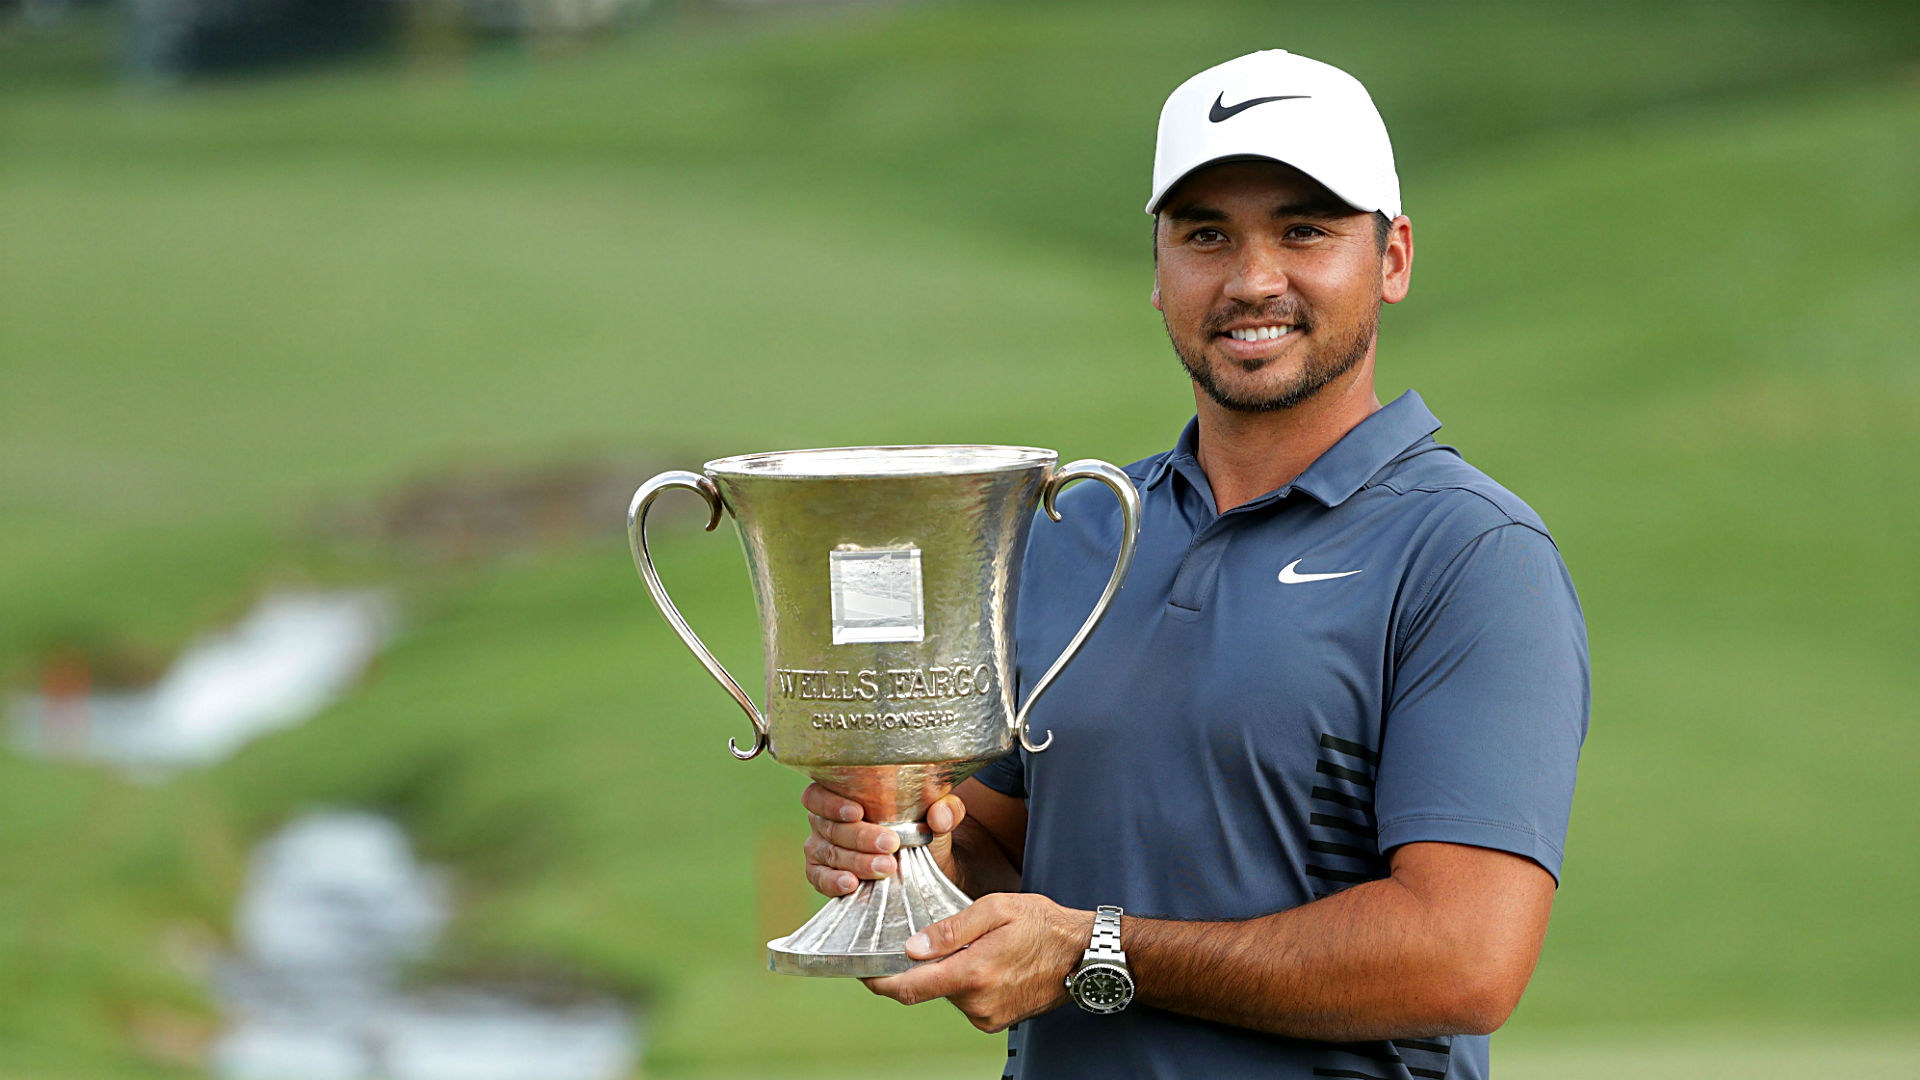 Wells Fargo Championship 2019 Tee times for Round 4, TV schedule, live